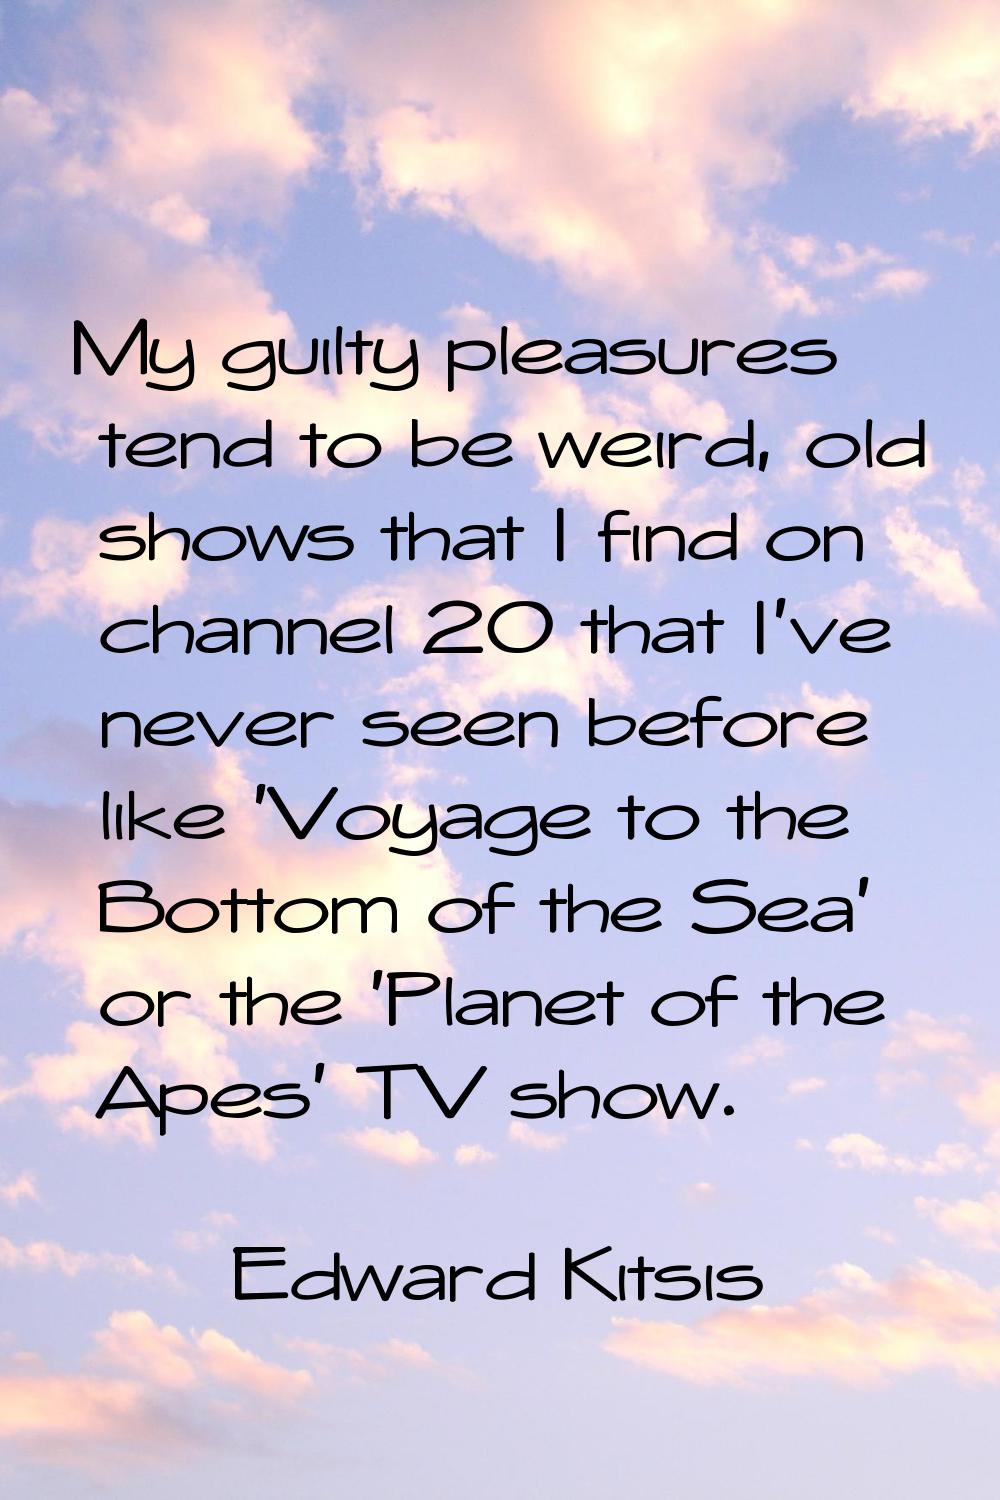 My guilty pleasures tend to be weird, old shows that I find on channel 20 that I've never seen befo